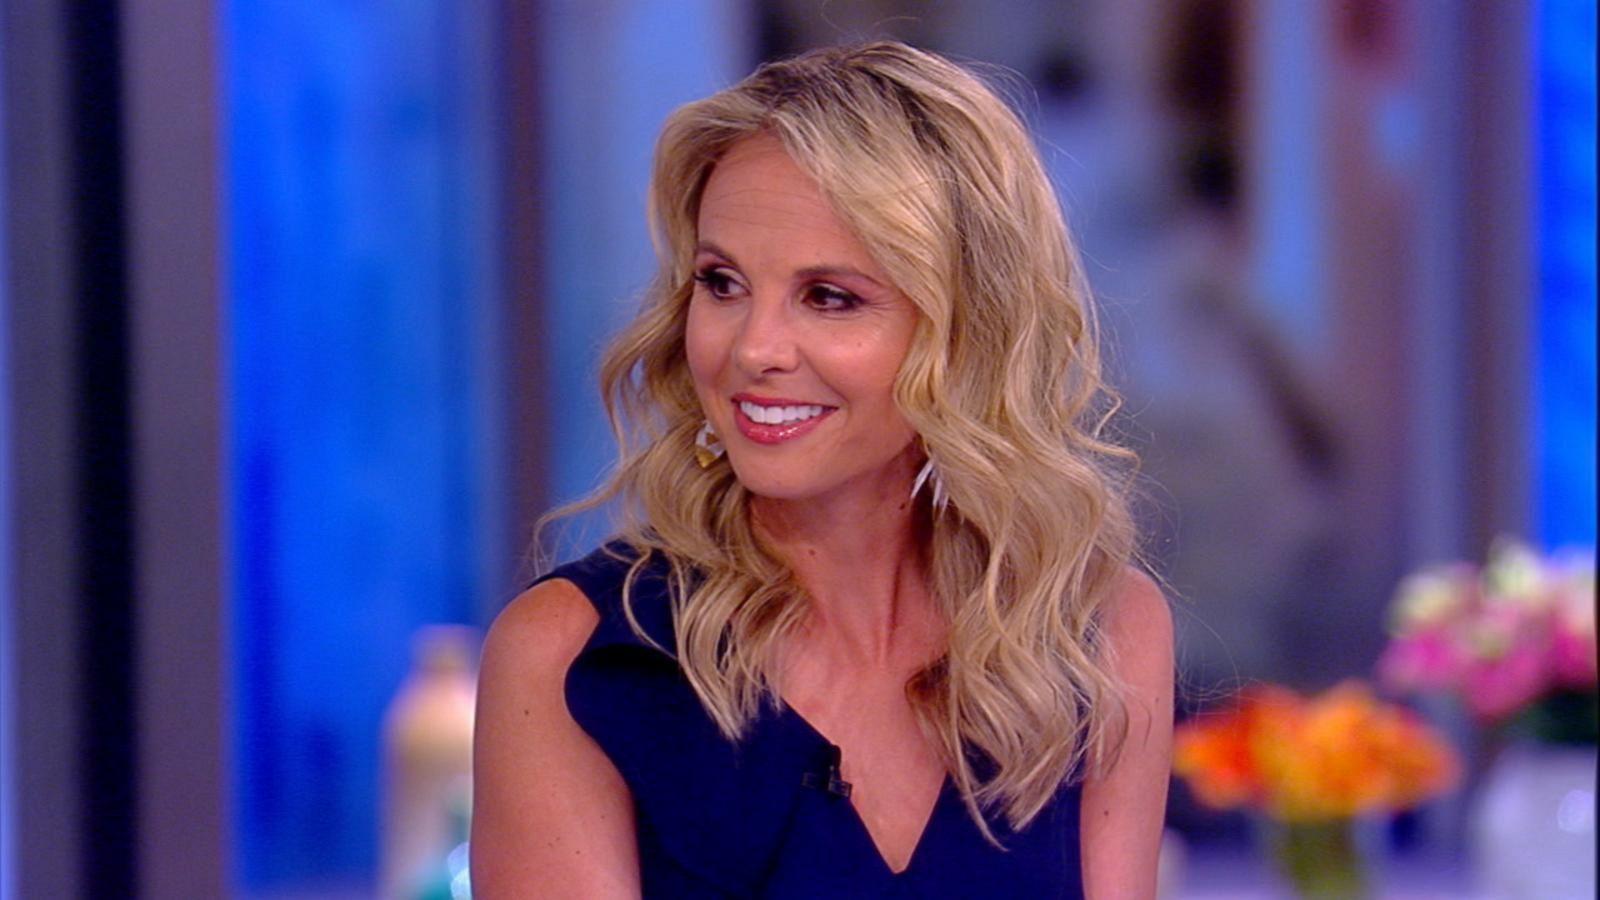 Elisabeth Hasselbeck says it 'feels really good' to be back on 'The